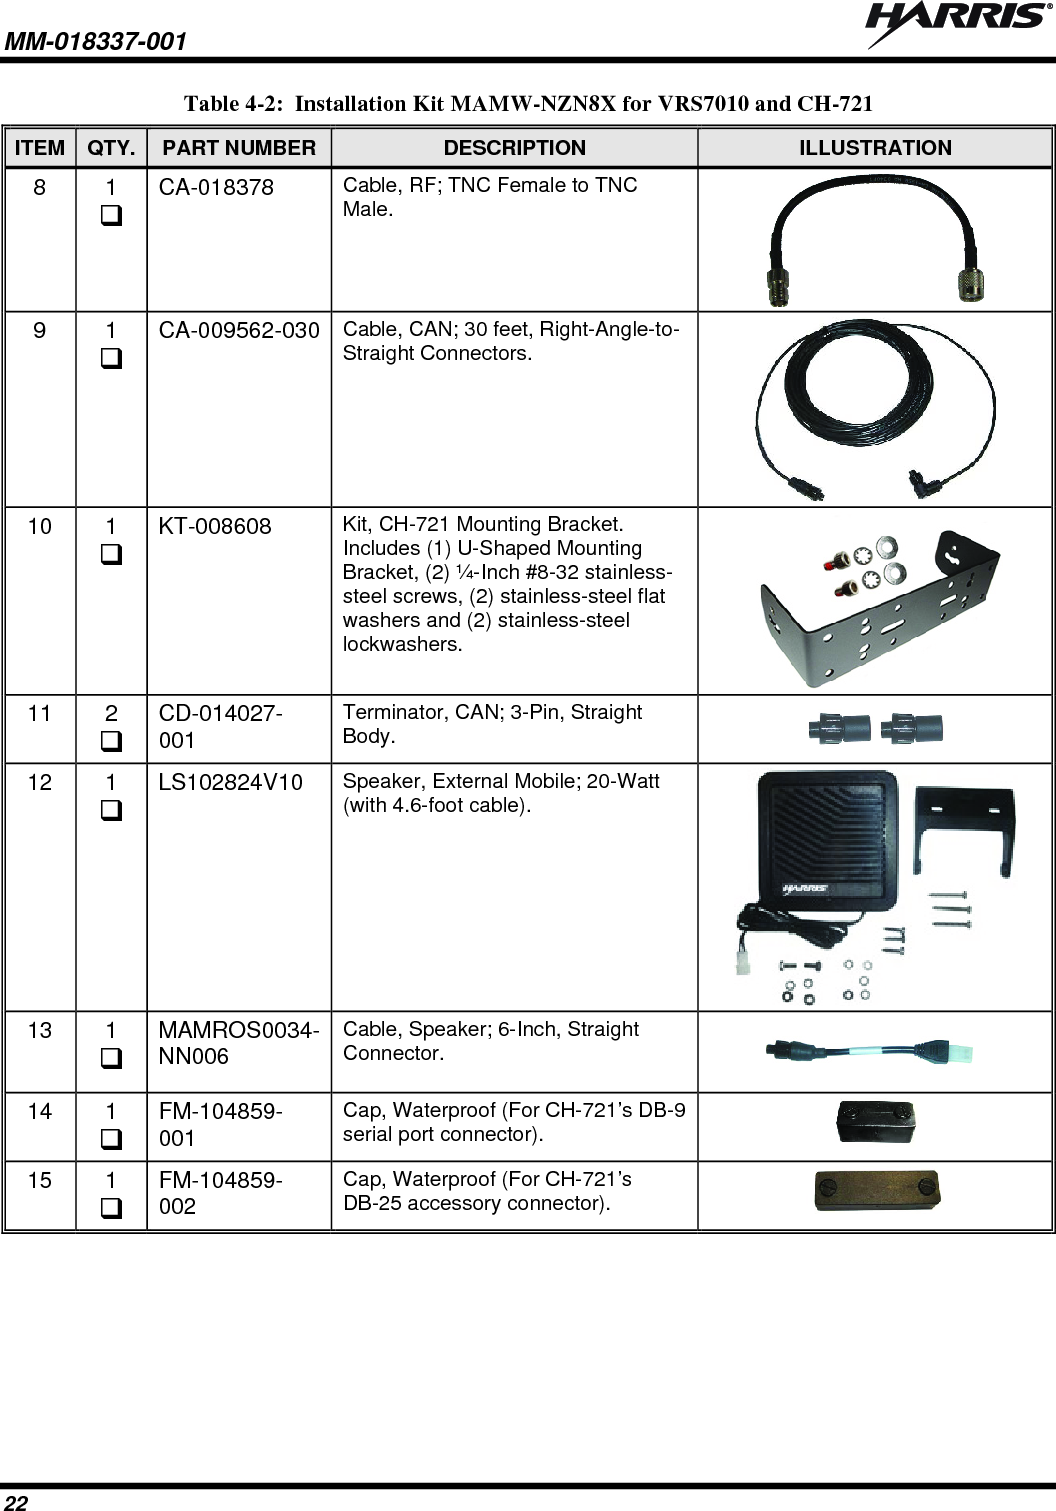 MM-018337-001   22 Table 4-2:  Installation Kit MAMW-NZN8X for VRS7010 and CH-721 ITEM  QTY.  PART NUMBER  DESCRIPTION  ILLUSTRATION 8 1  CA-018378  Cable, RF; TNC Female to TNC Male.  9 1  CA-009562-030  Cable, CAN; 30 feet, Right-Angle-to-Straight Connectors.  10 1  KT-008608  Kit, CH-721 Mounting Bracket. Includes (1) U-Shaped Mounting Bracket, (2) ¼-Inch #8-32 stainless-steel screws, (2) stainless-steel flat washers and (2) stainless-steel lockwashers.  11 2  CD-014027-001 Terminator, CAN; 3-Pin, Straight Body.    12 1  LS102824V10  Speaker, External Mobile; 20-Watt (with 4.6-foot cable).  13 1  MAMROS0034-NN006 Cable, Speaker; 6-Inch, Straight Connector.  14 1  FM-104859-001 Cap, Waterproof (For CH-721’s DB-9 serial port connector).   15 1  FM-104859-002 Cap, Waterproof (For CH-721’s DB-25 accessory connector).    